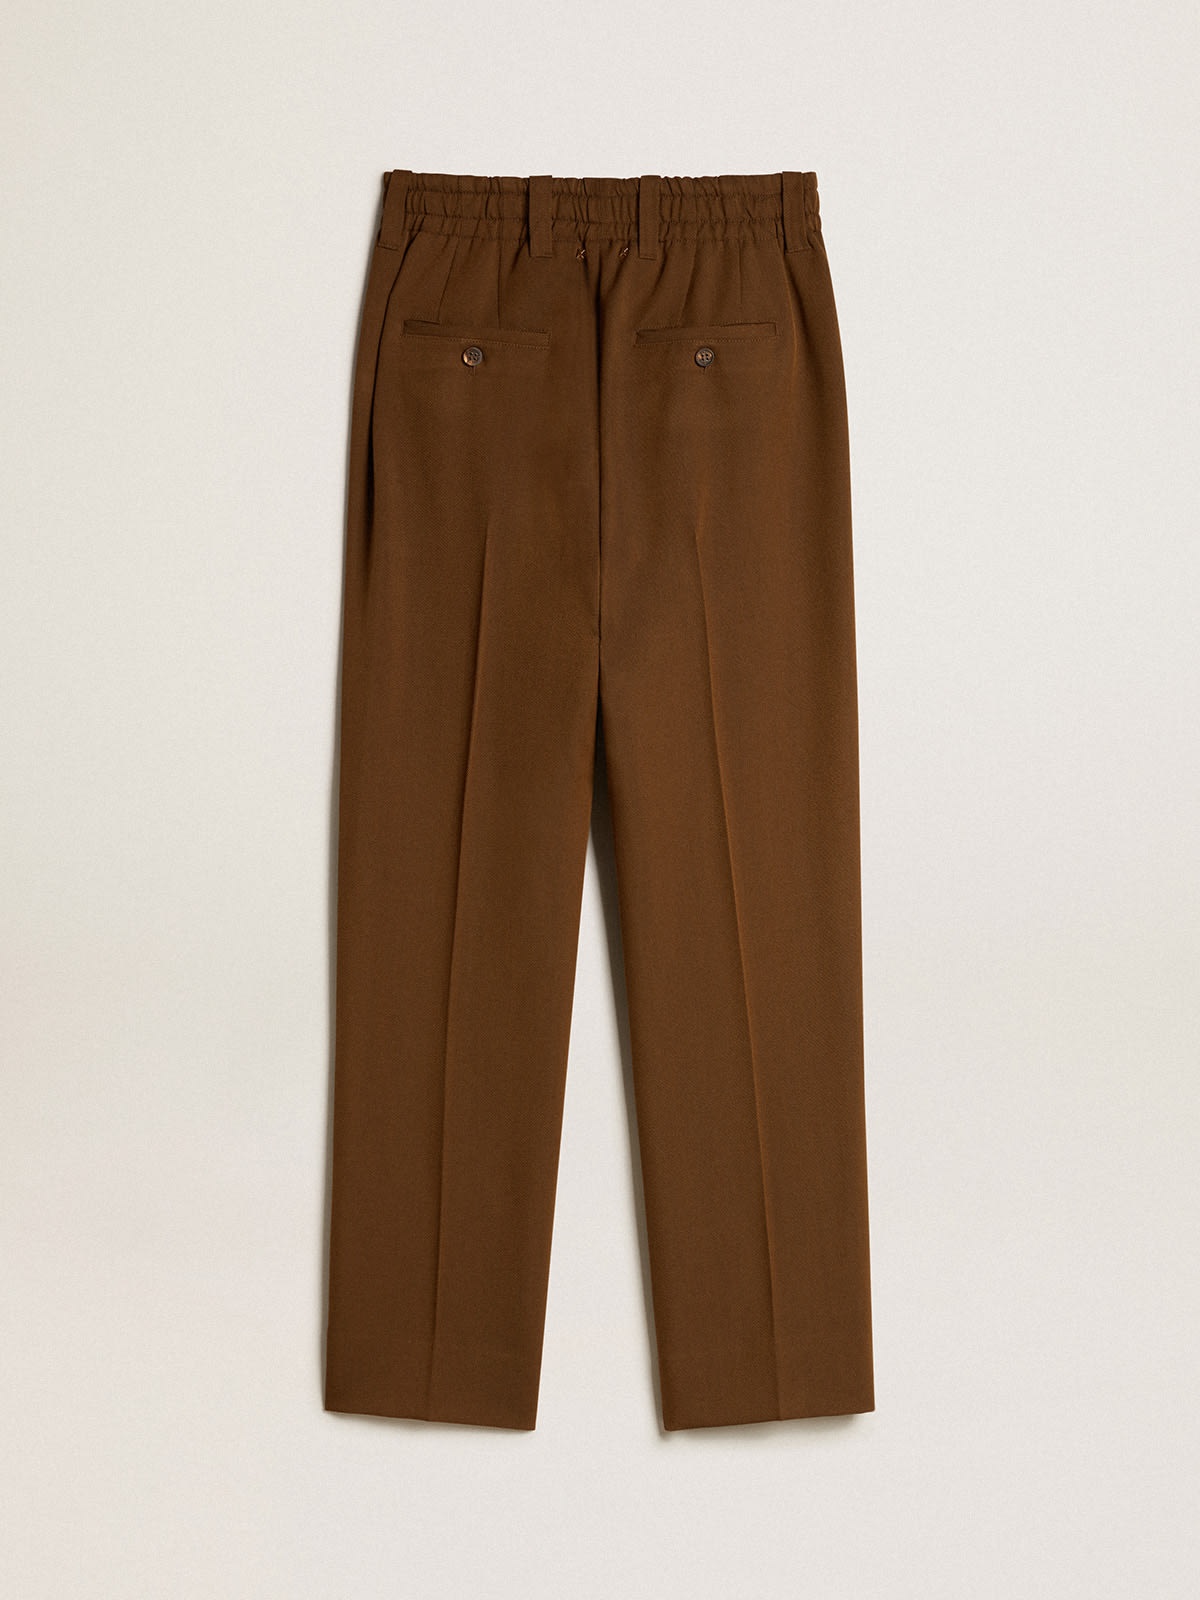 Beech-colored pants in wool and viscose blend - 6